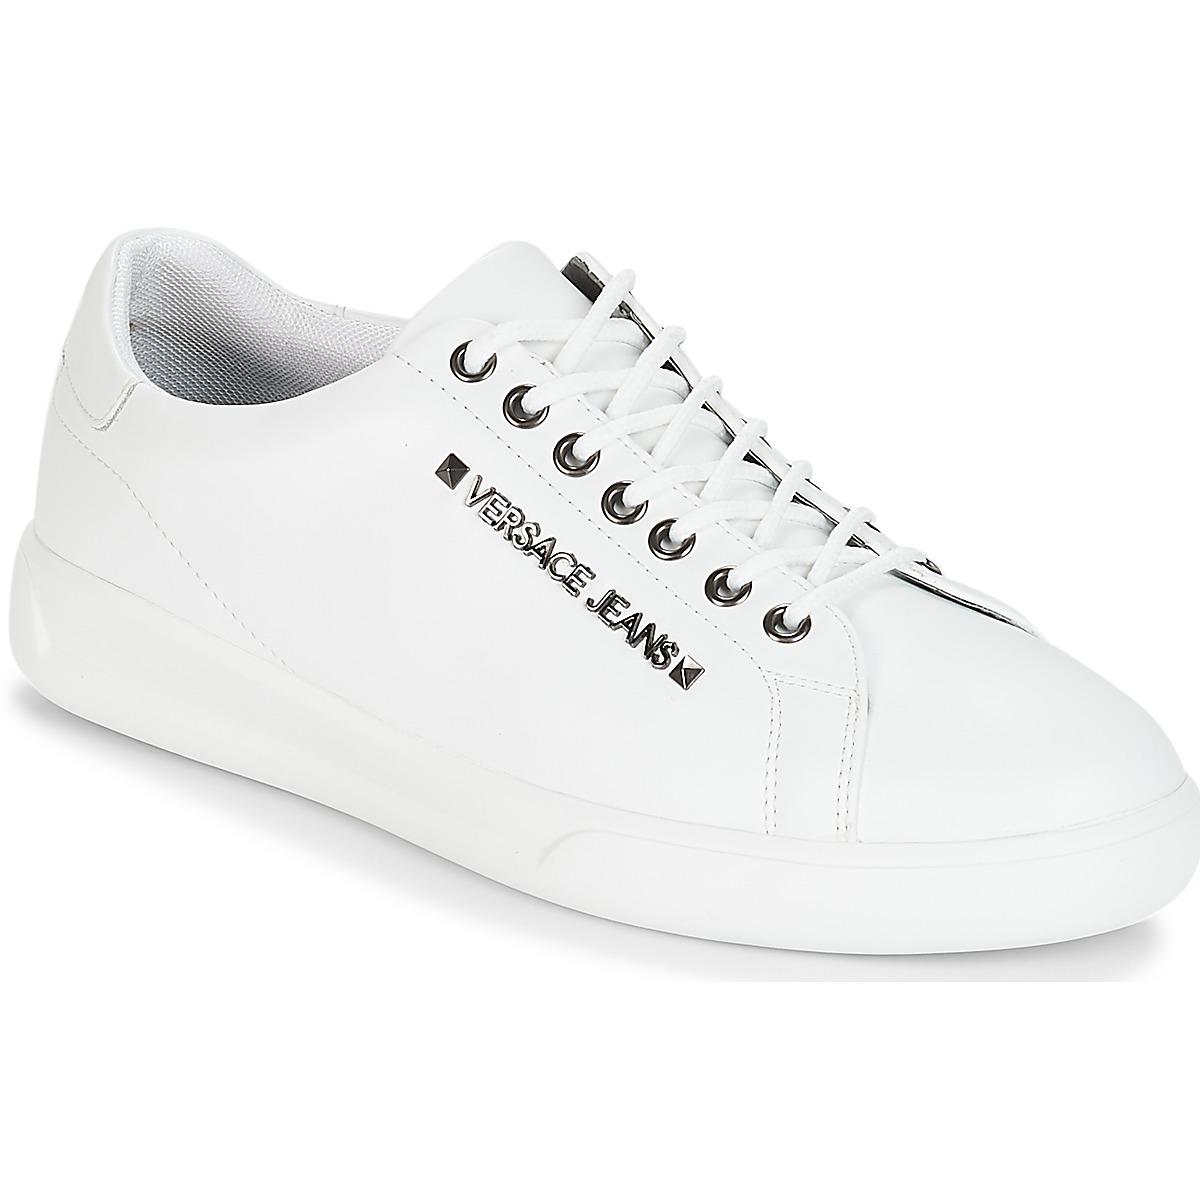 Versace Jeans Couture Denim Trainers In White for Men - Lyst